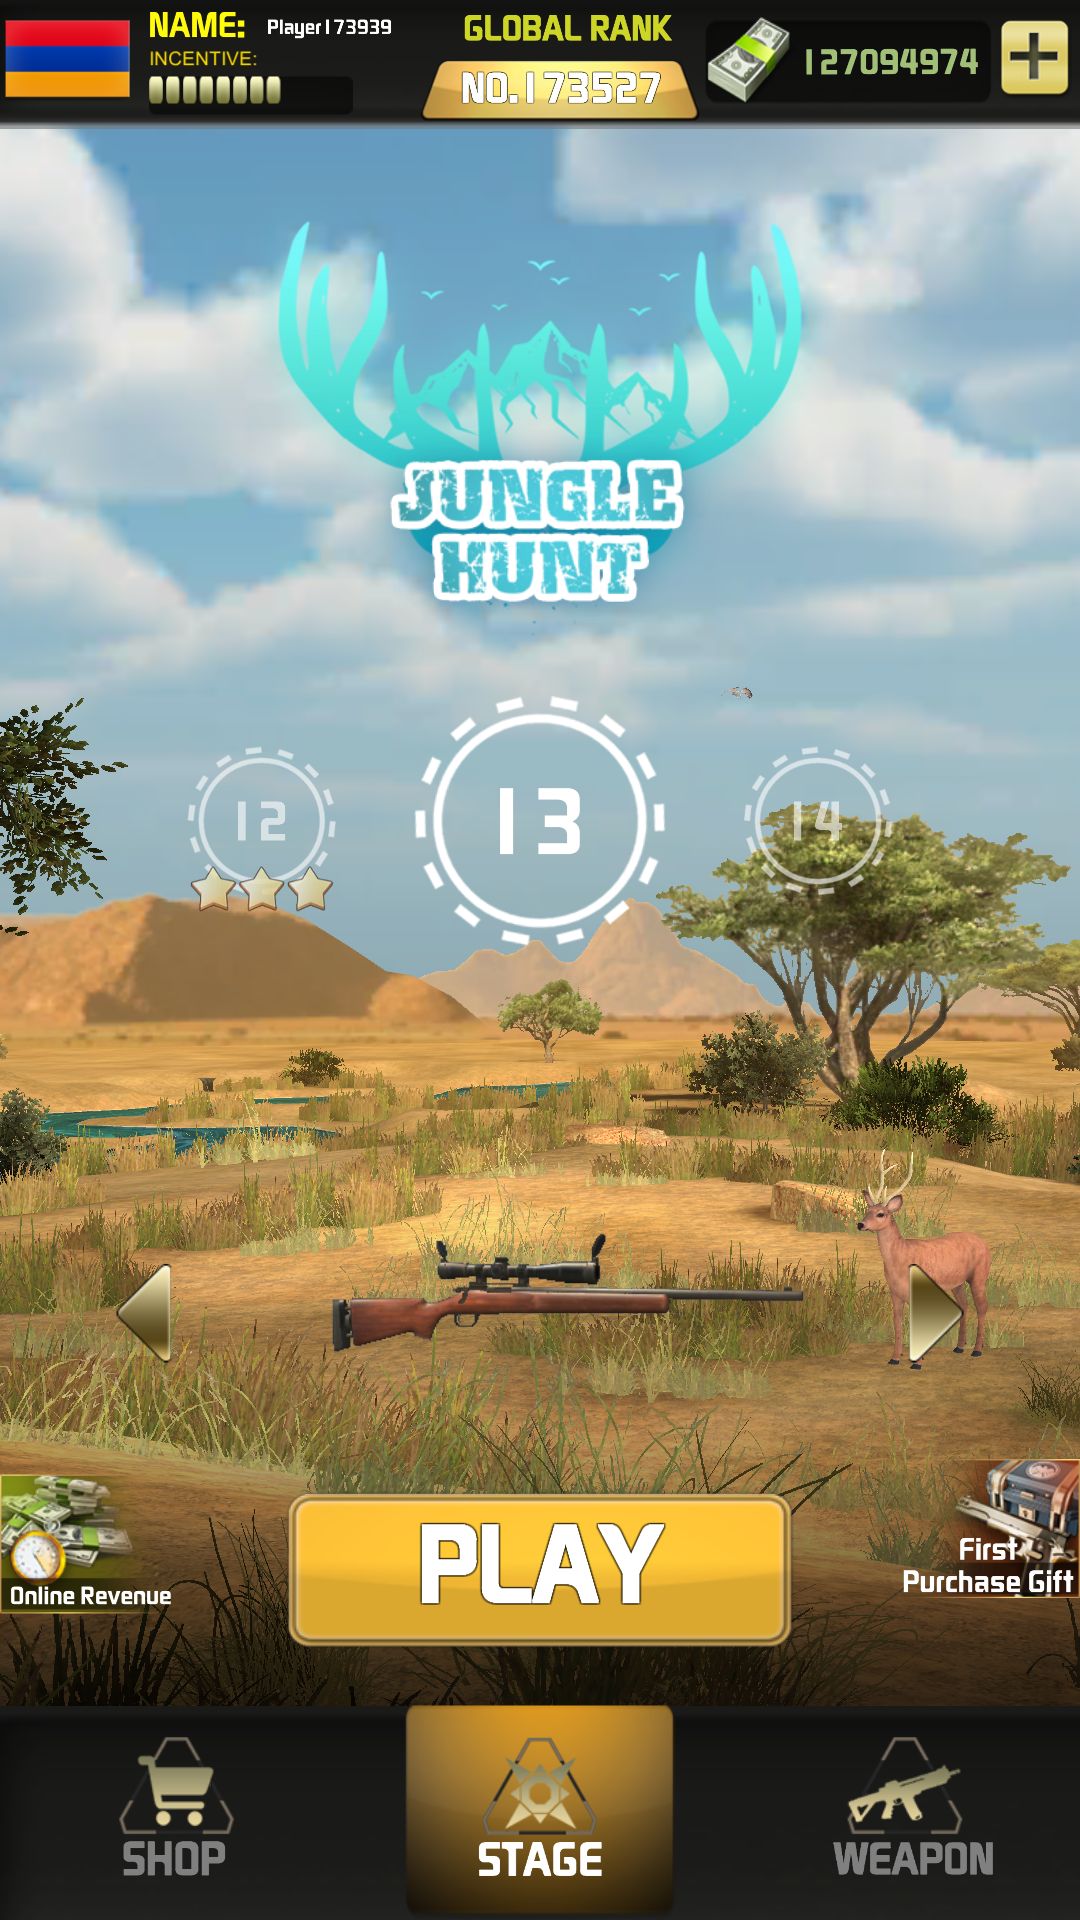 Download The Hunting World - 3D Wild Shooting Game für Android A.n.d.r.o.i.d. .5...0. .a.n.d. .m.o.r.e kostenlos.